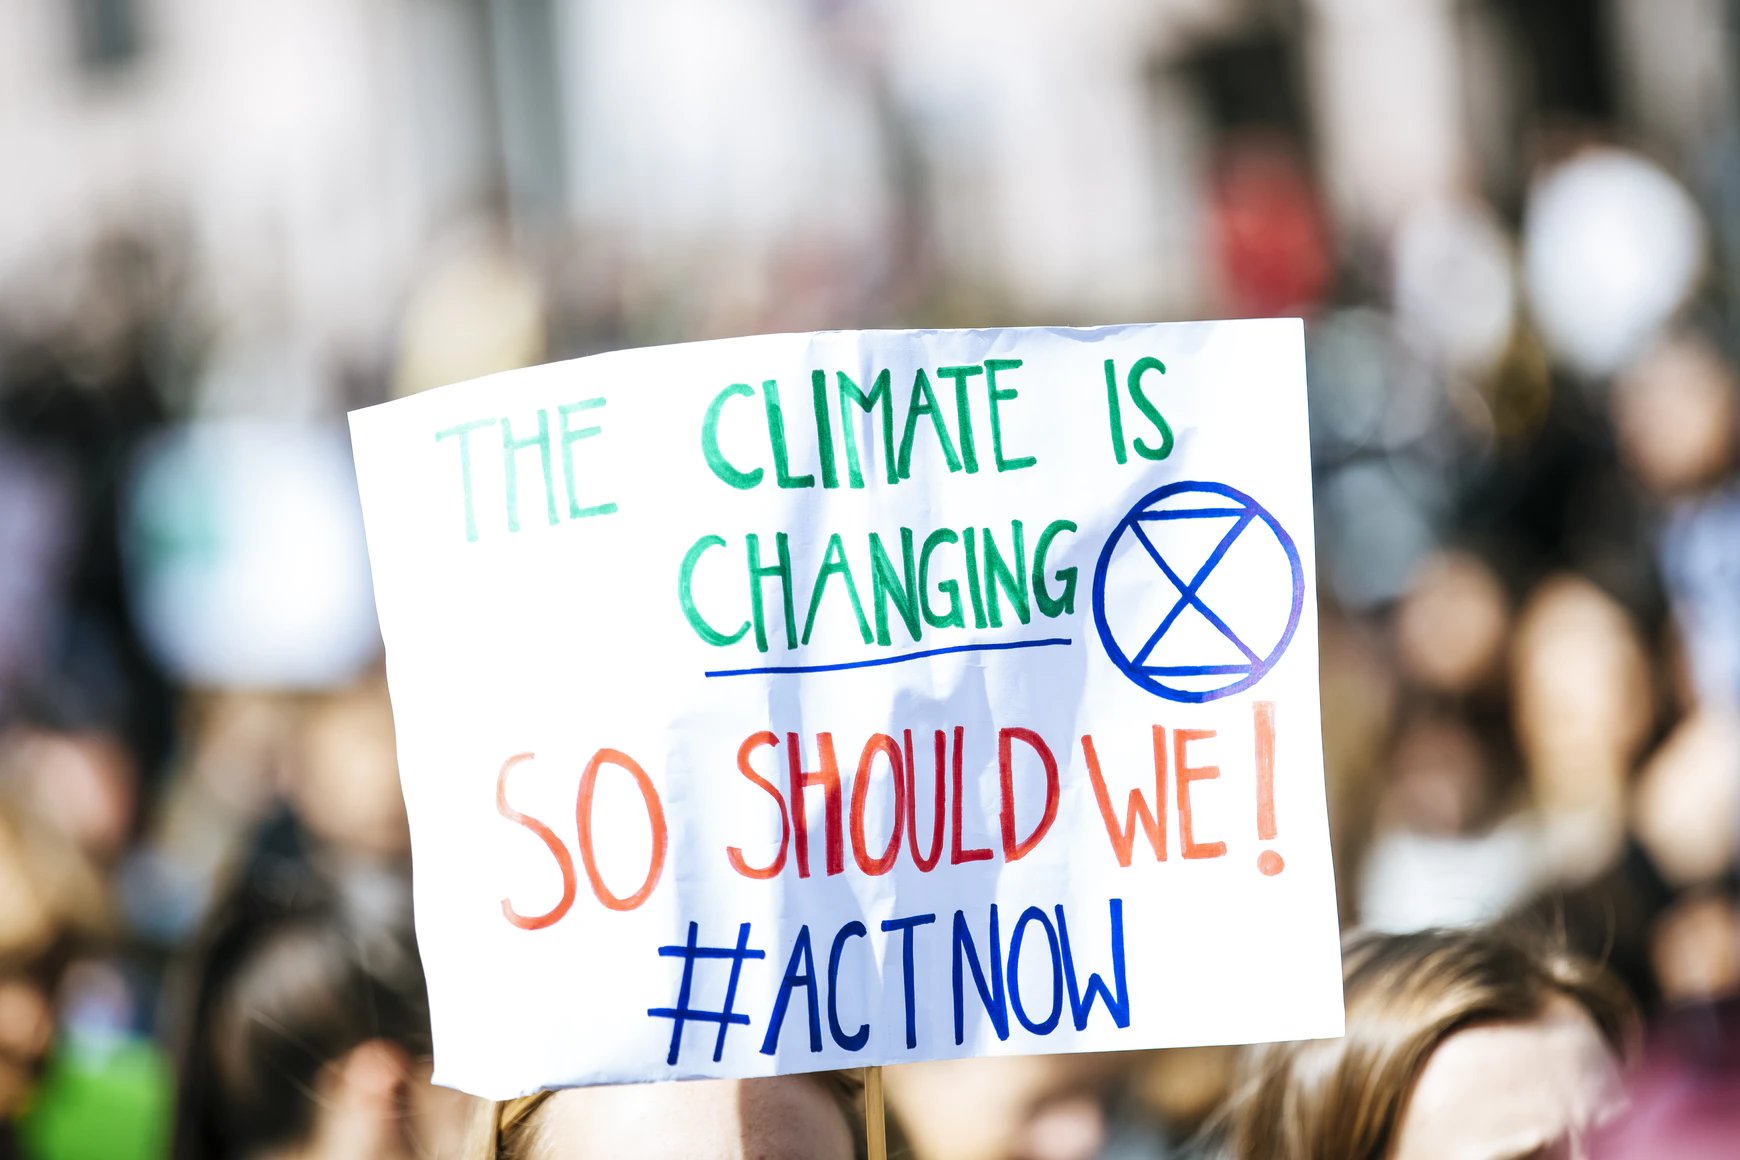 It's time for action now to change the future: Image by Unsplash